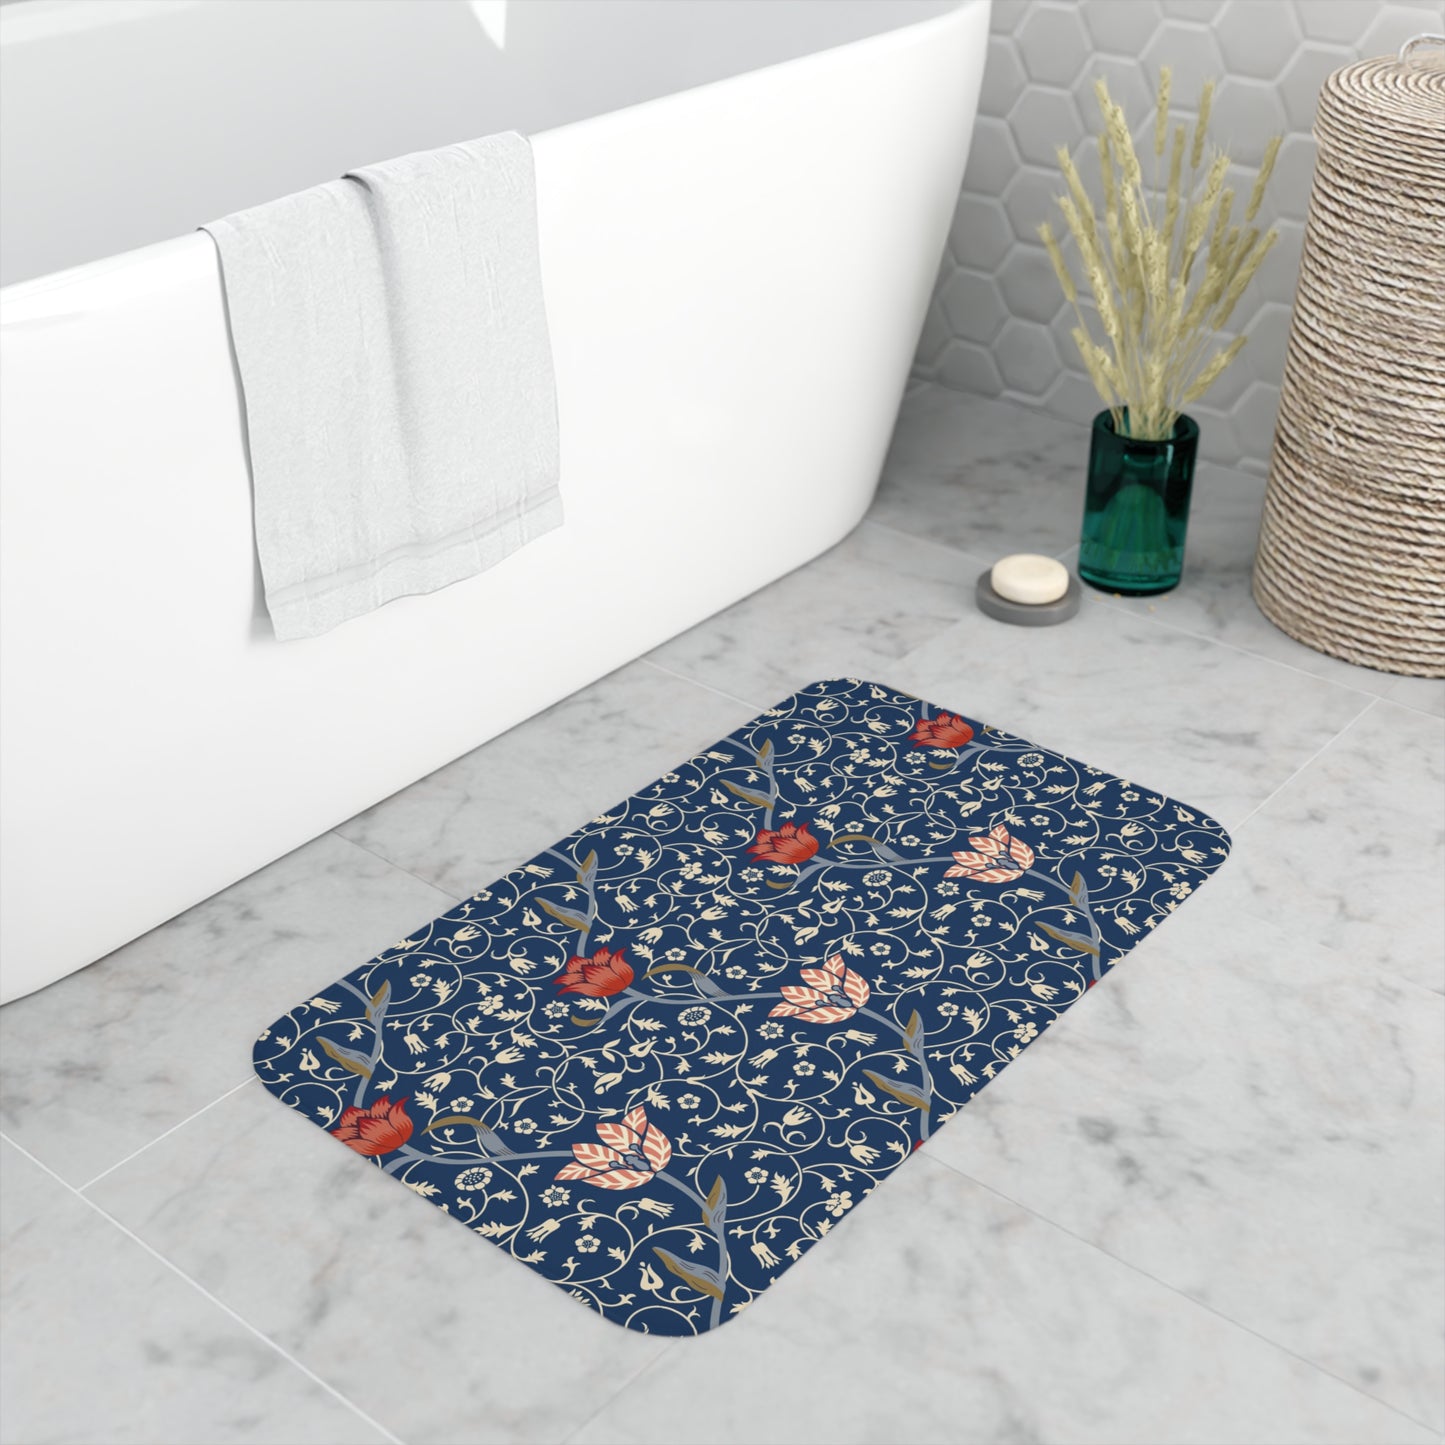 william-morris-amp-co-memory-foam-bath-mat-medway-collection-7